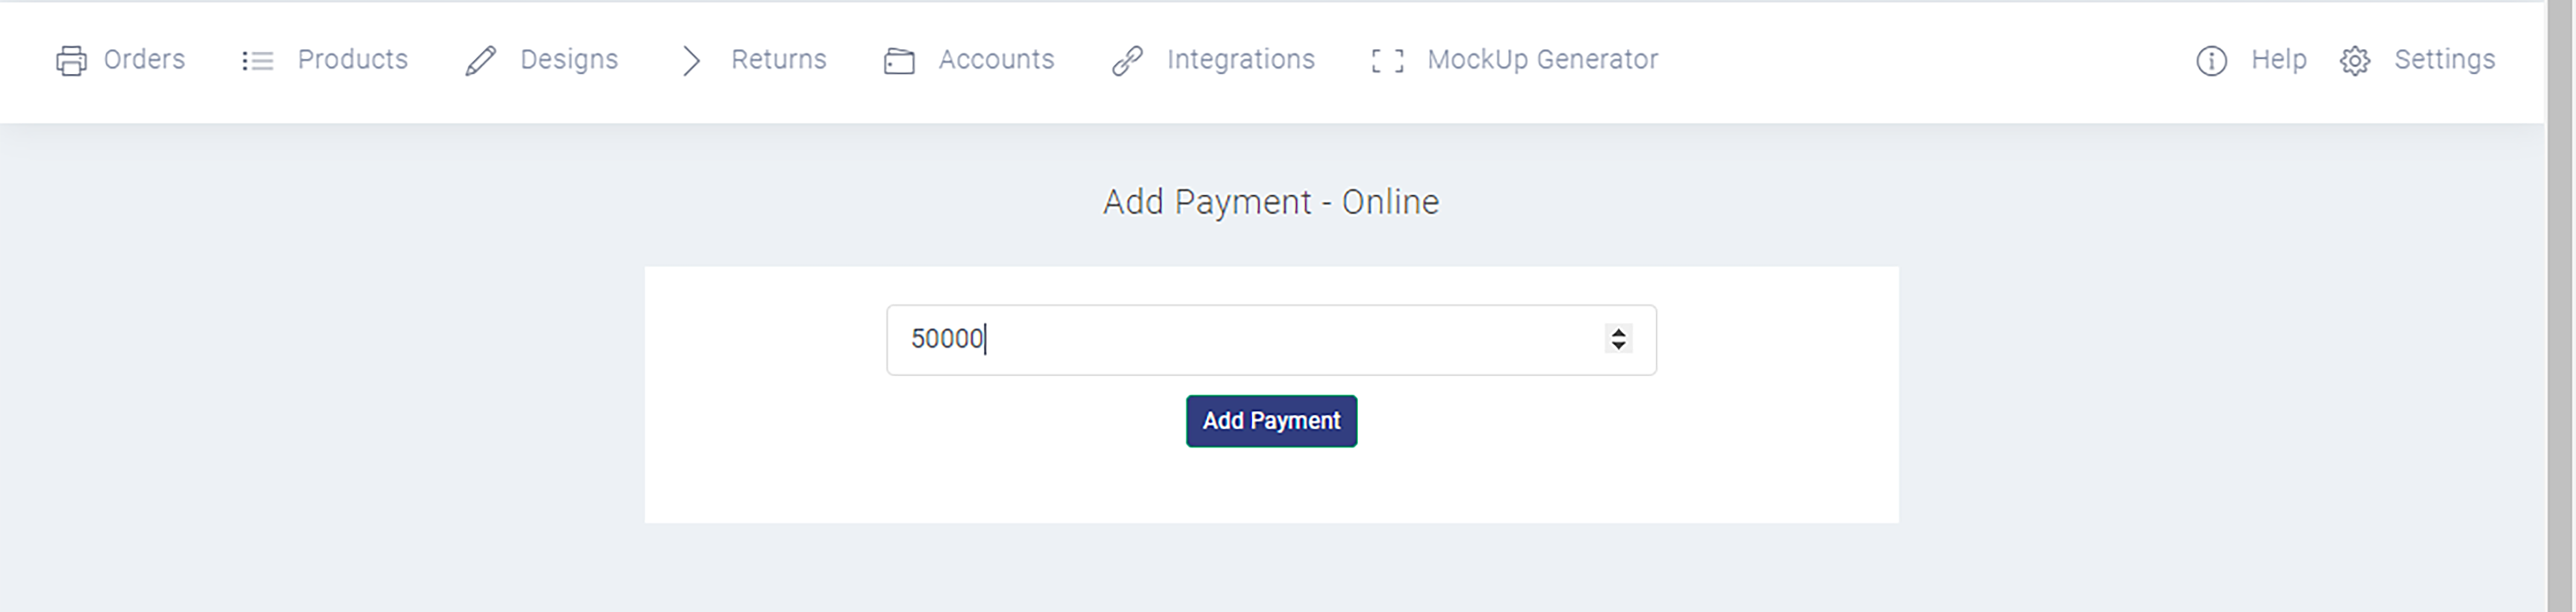 add payment option from qikink dashboard